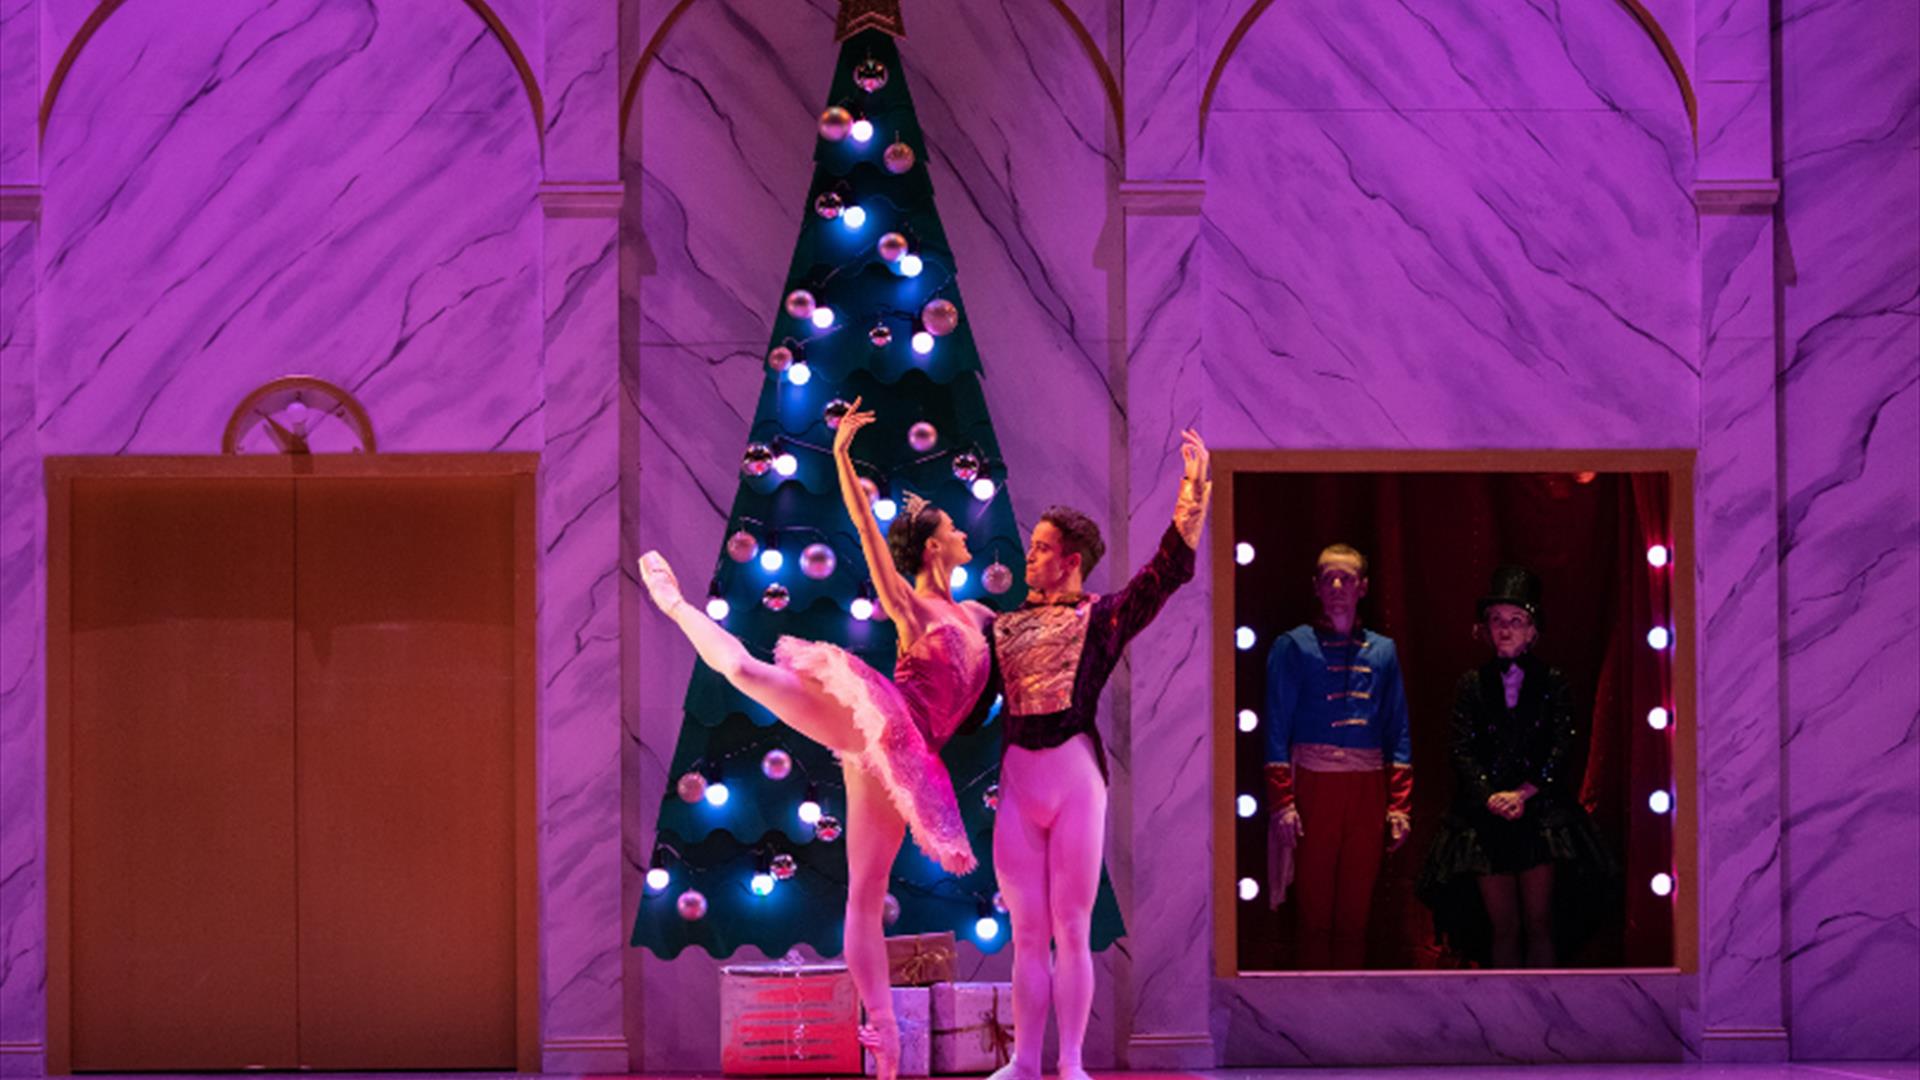 Ballerina Clara in arabesque and The Nutcracker, in front of a sparkling Christmas tree, arms extended in pose. Soft purple lighting